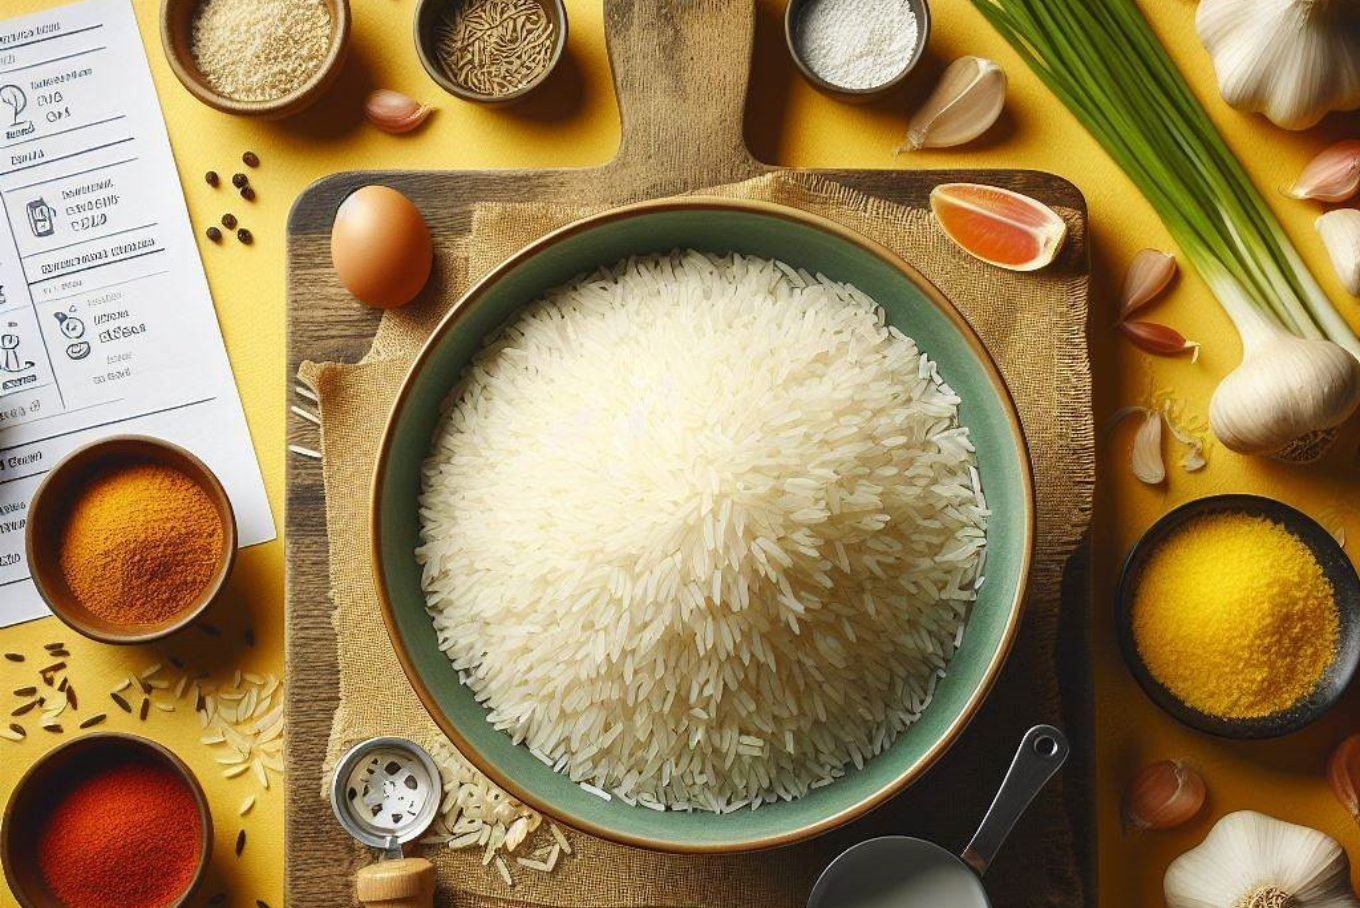 Basmati Rice from India: Crowned the Best Rice in the World by TasteAtlas